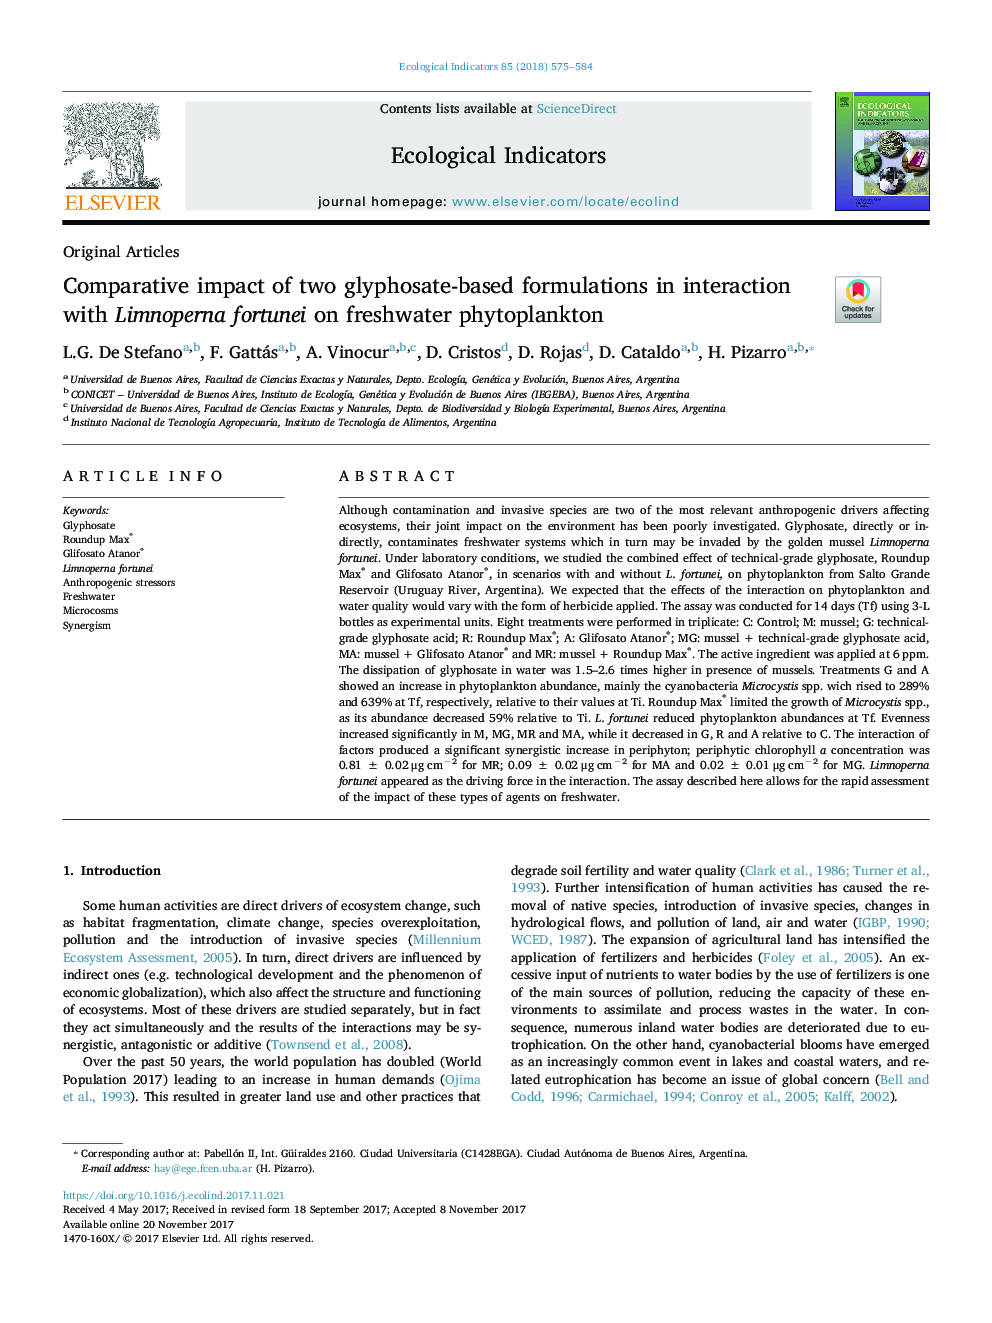 Comparative impact of two glyphosate-based formulations in interaction with Limnoperna fortunei on freshwater phytoplankton